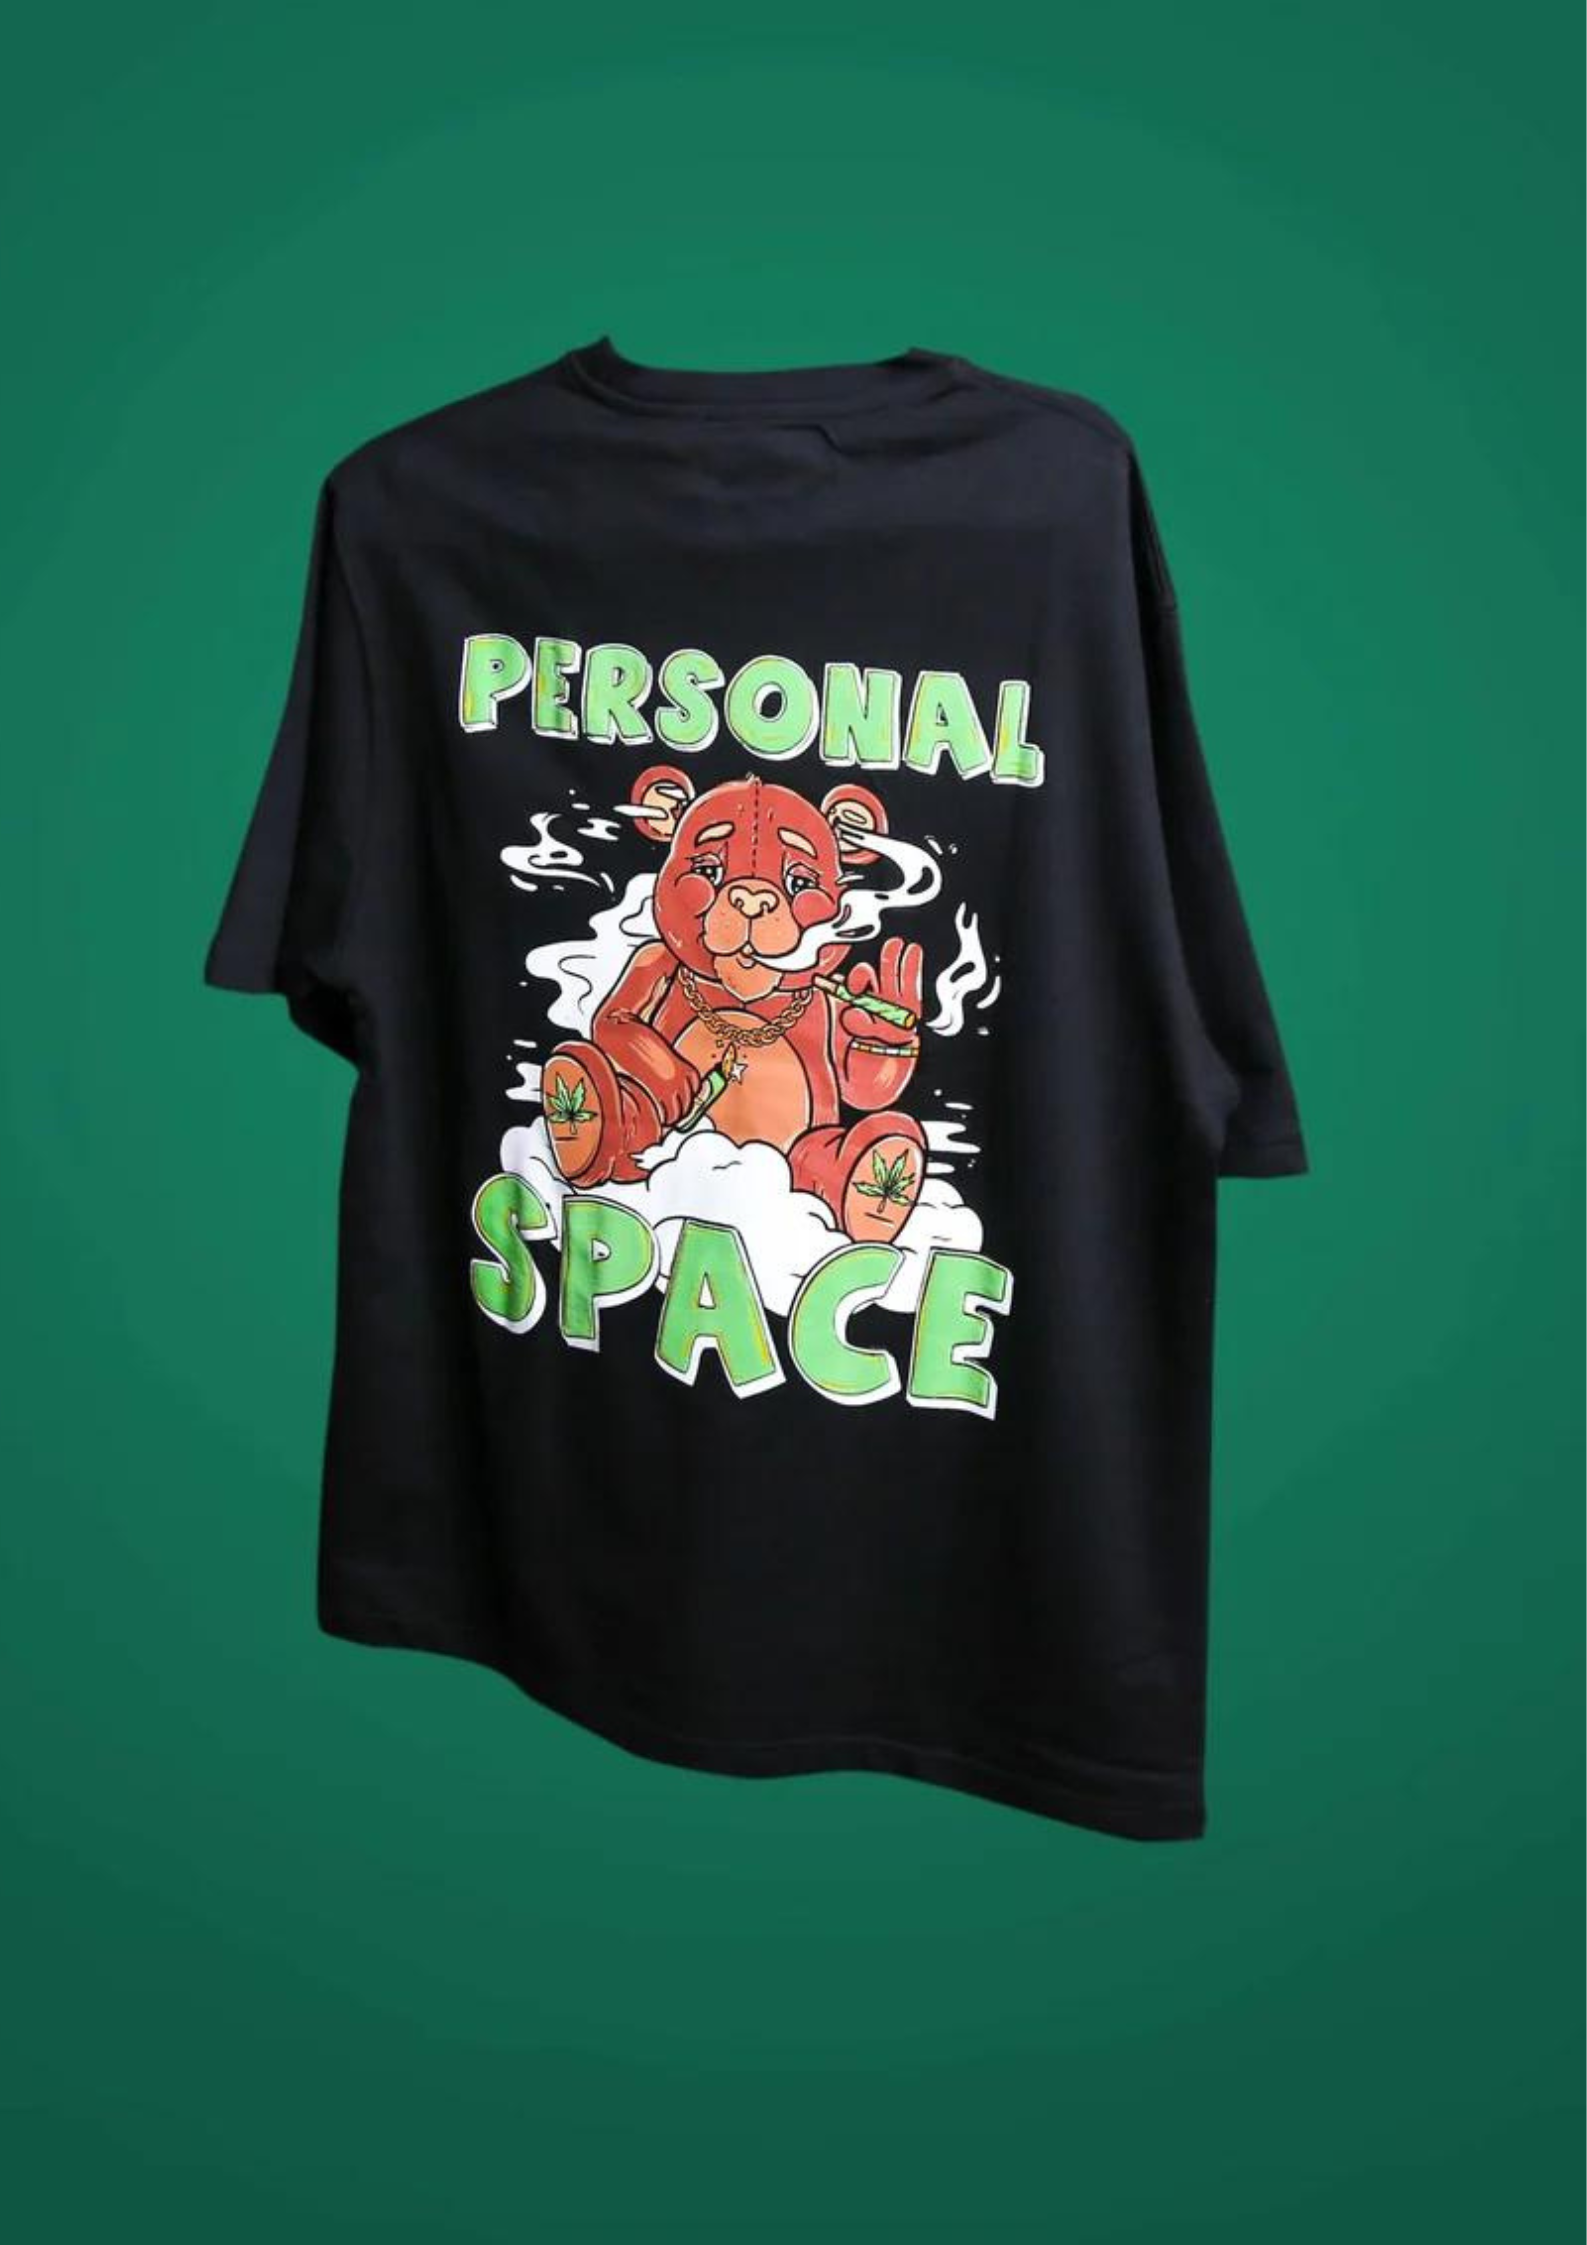 Personal Space Oversized Tee